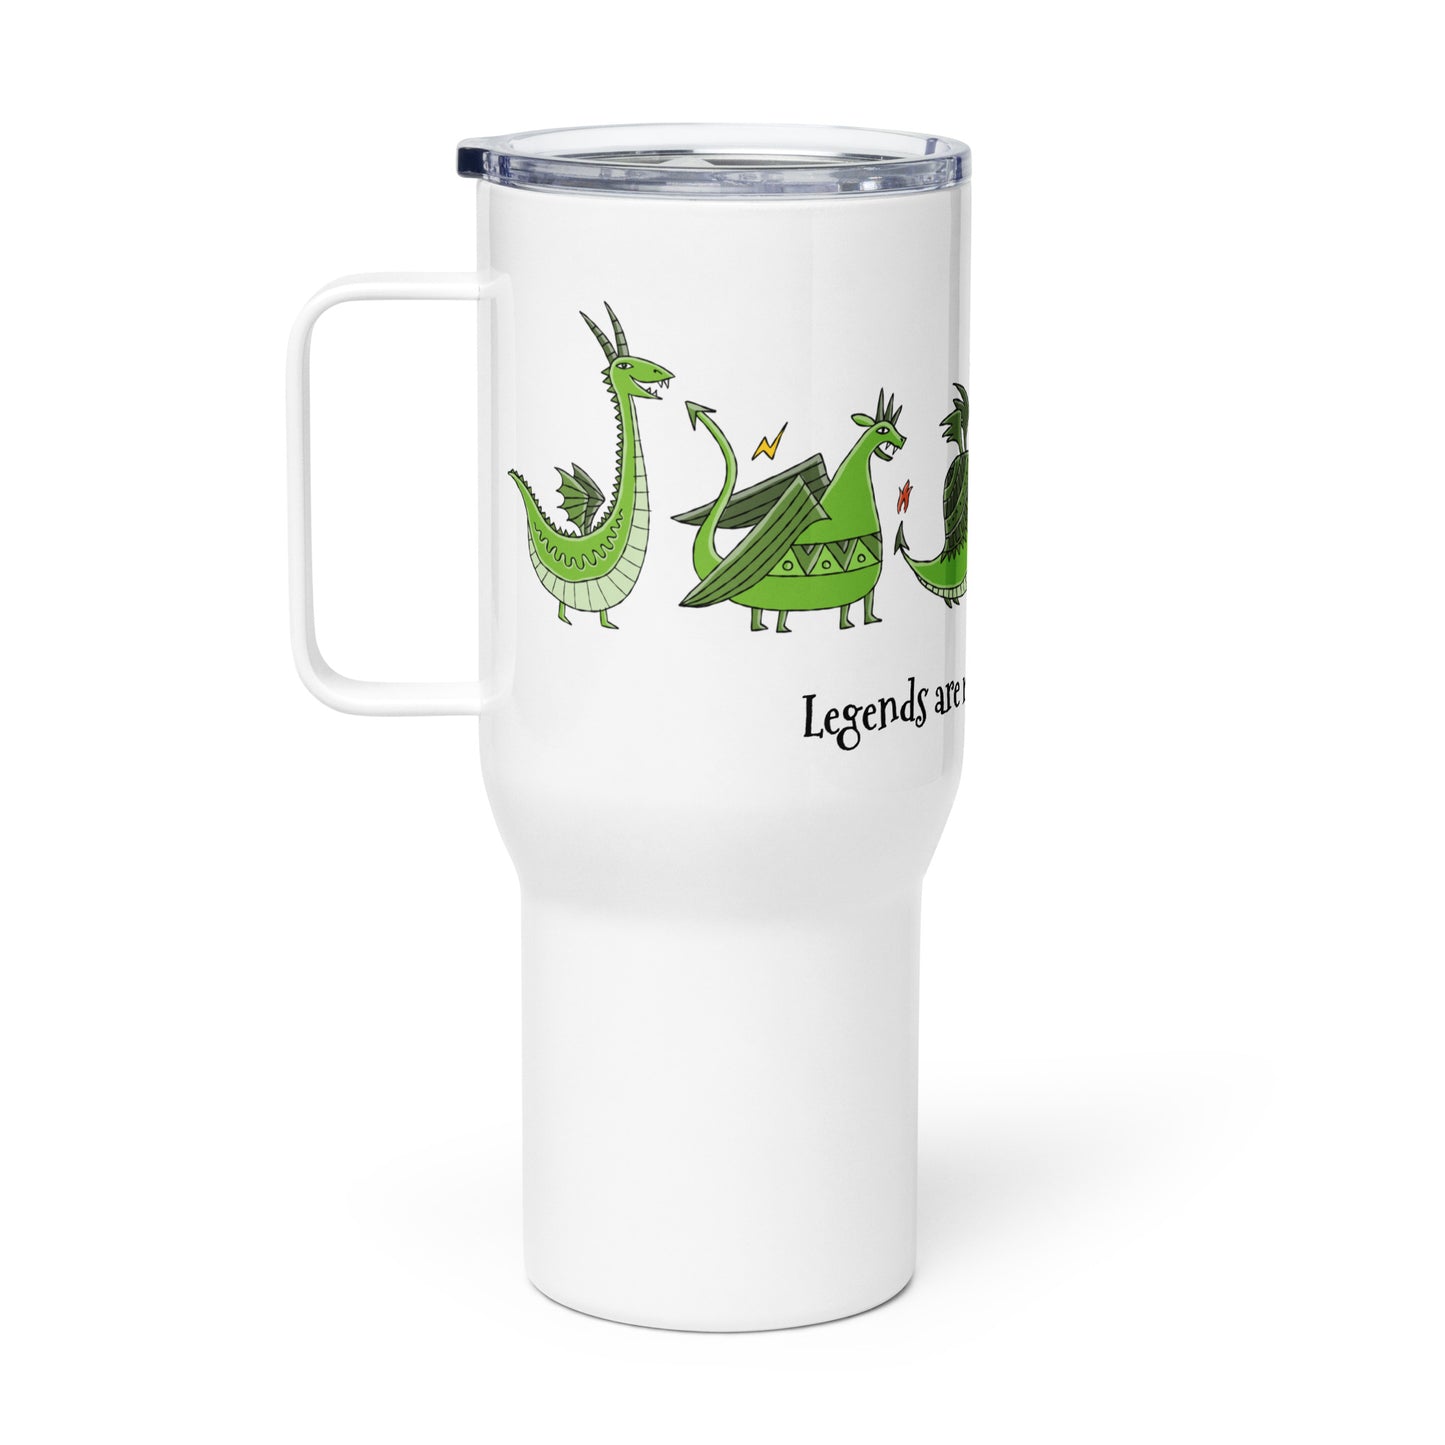 Personalised Travel mug with a handle. Funny Green Dragons print. 